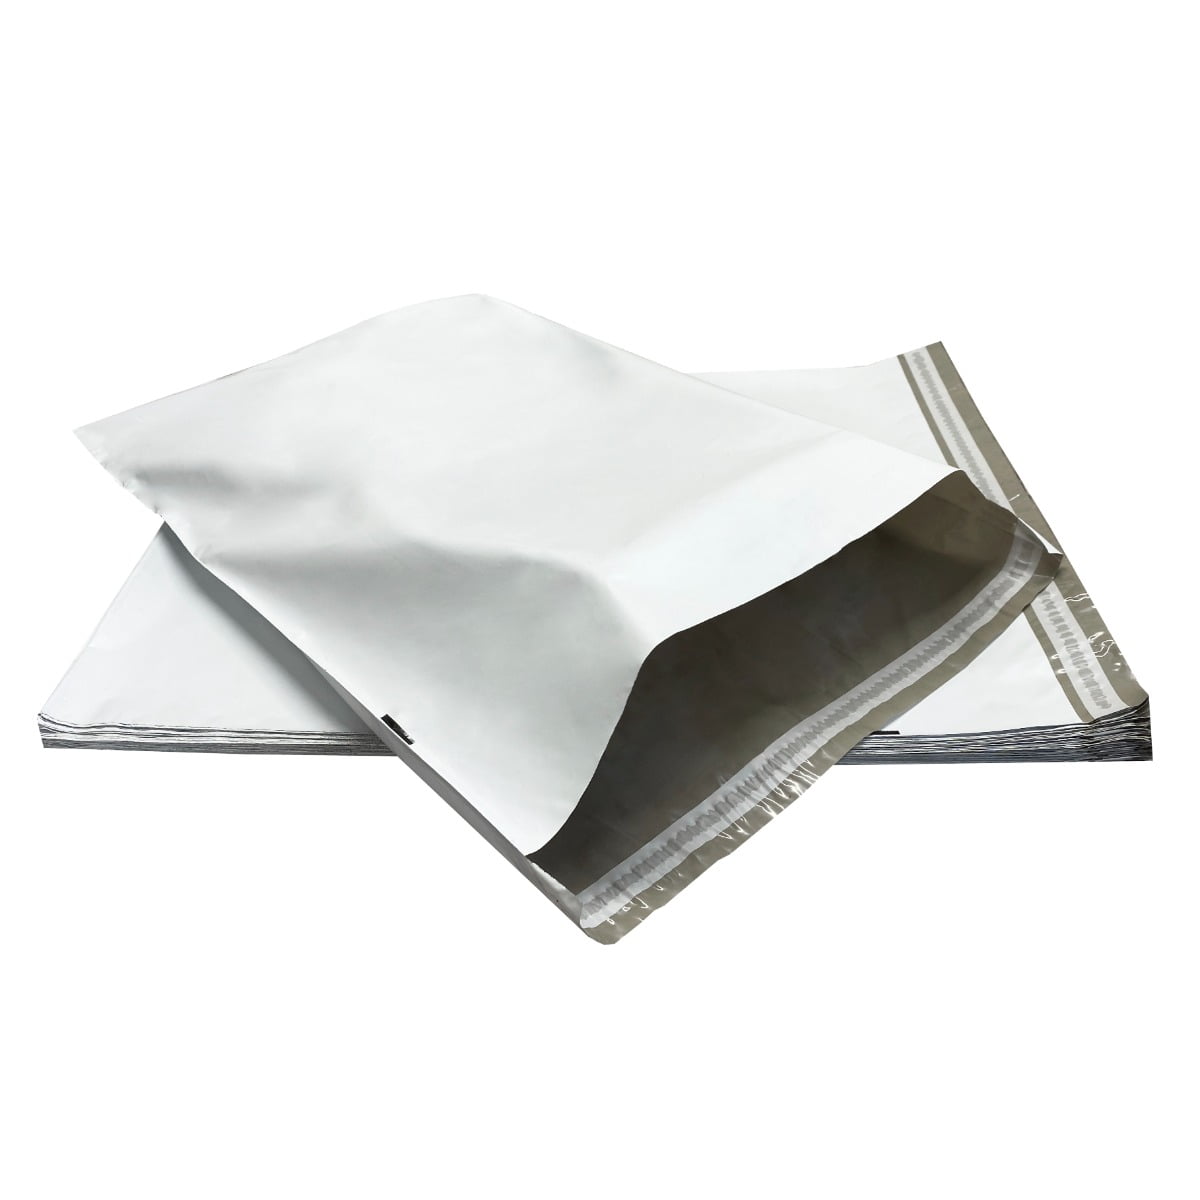 POLY MAILERS Shipping Envelopes Plastic Mailing Bags Self Sealing White Small 